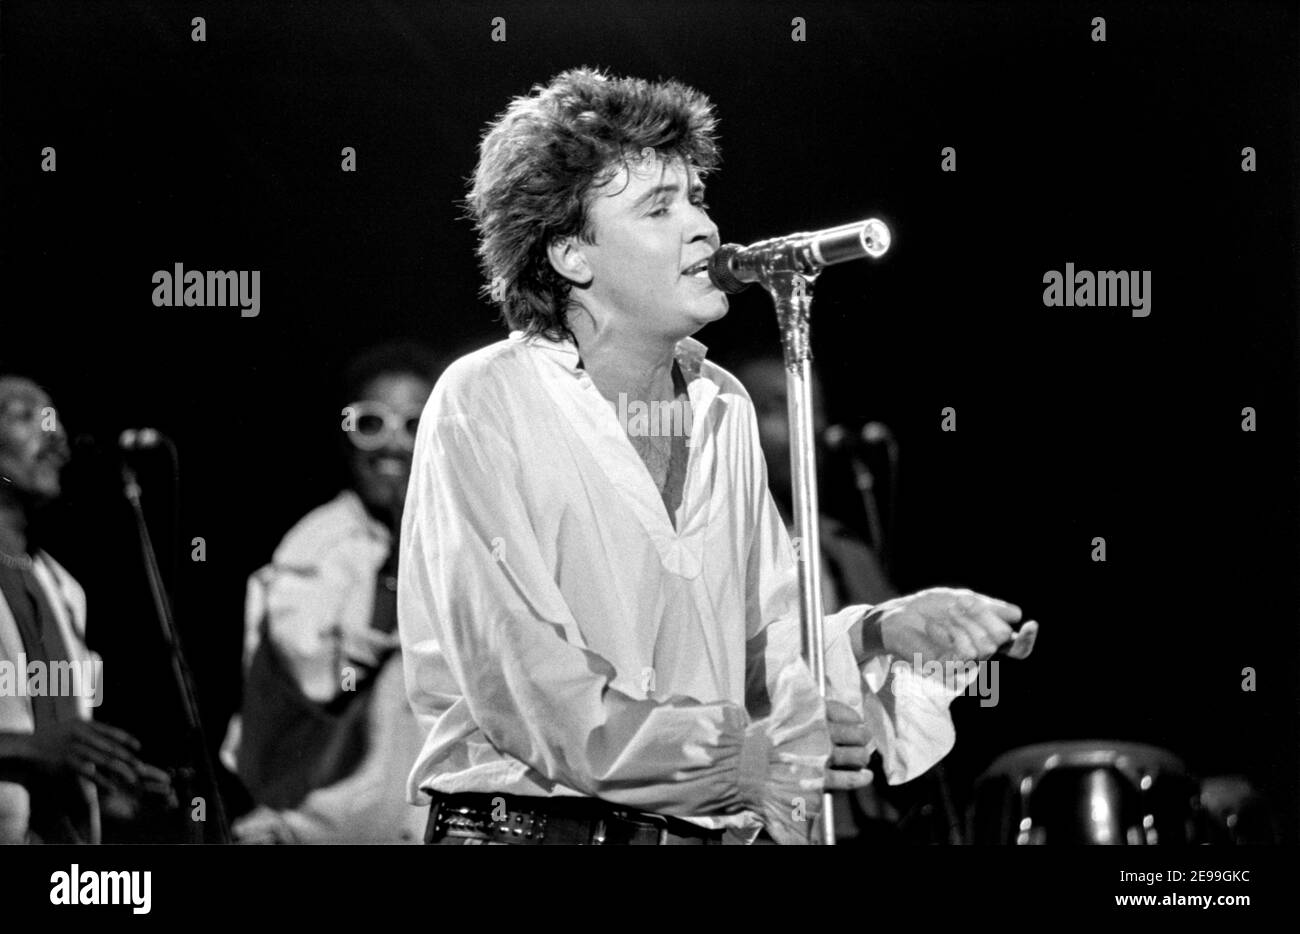 MUNSTER, GERMANY - FEB 02, 1992: Paul Young is an English singer, songwriter and musician. Here he is live on stage during a concert in Germany. Stock Photo